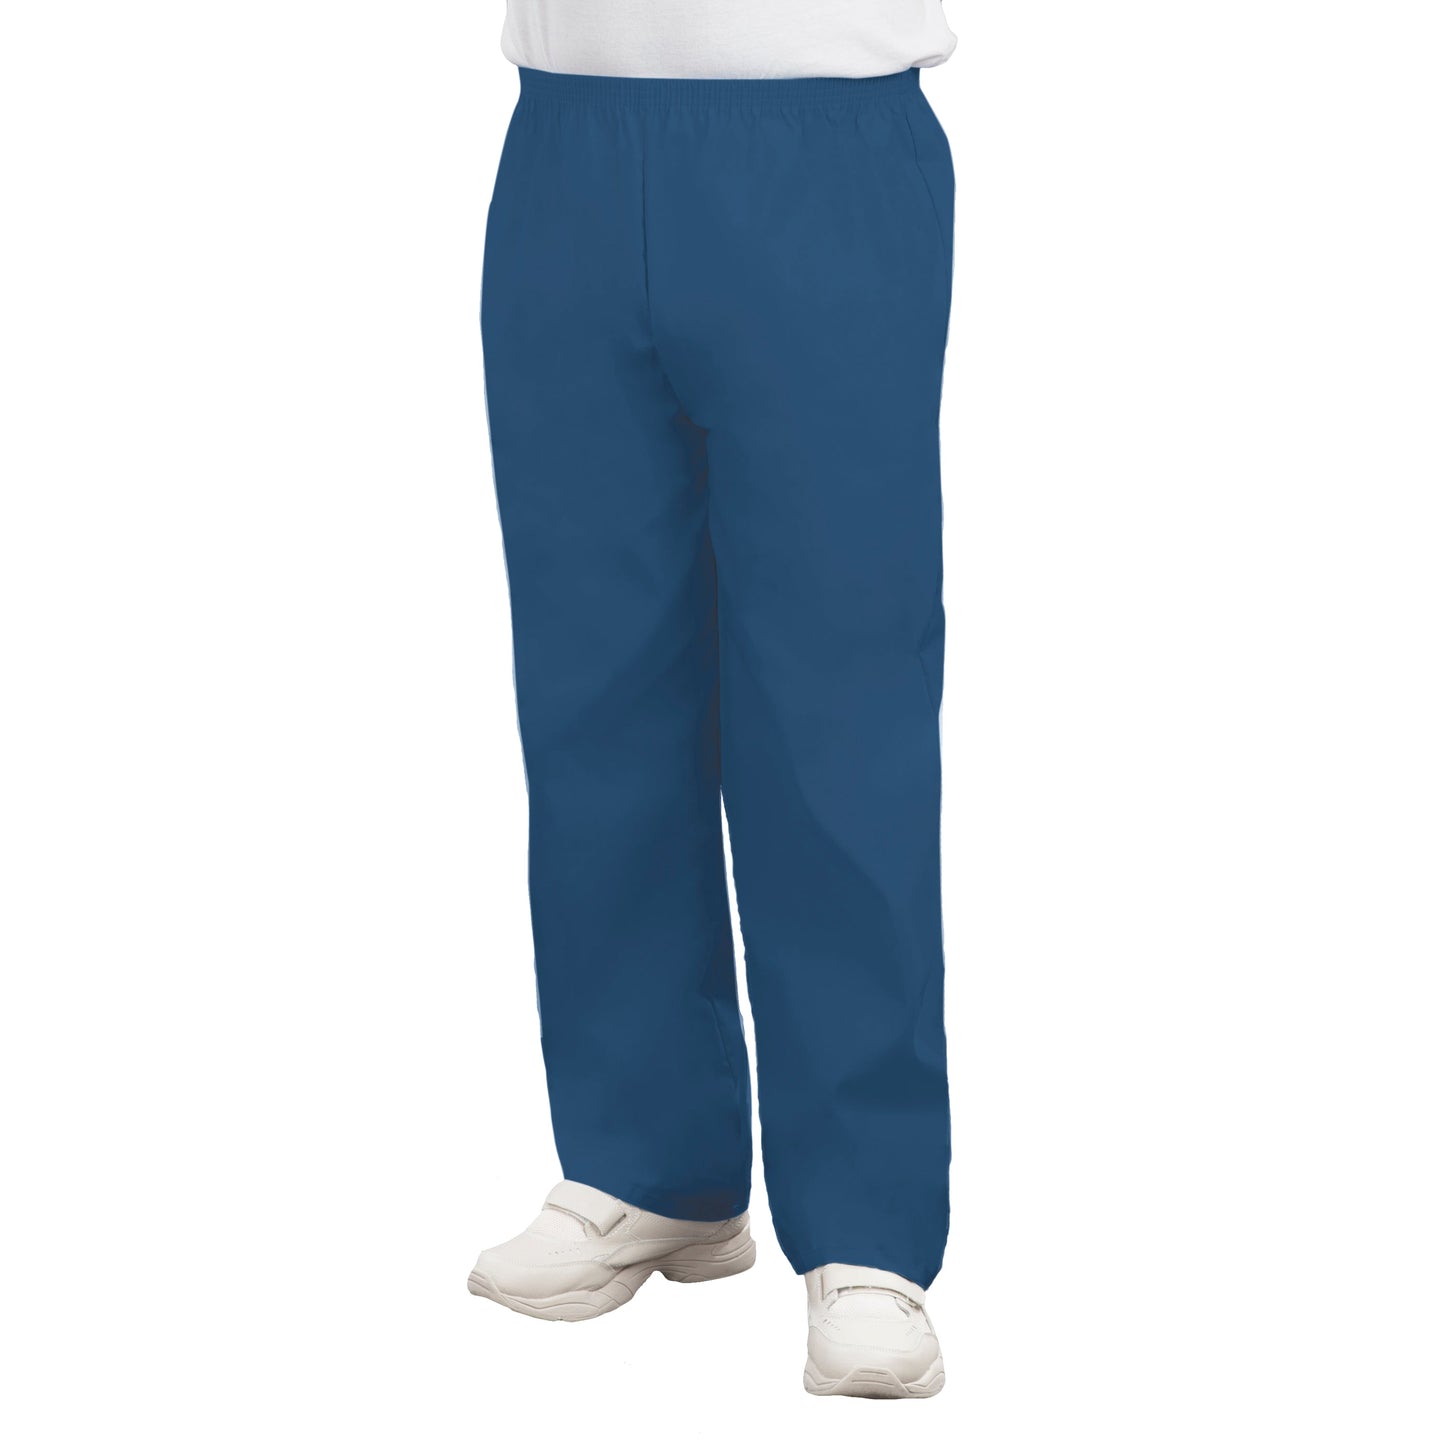 American Dawn | Navy Blue 3X-Large Patient Bottoms | Pajama Pant With No Pockets And Fly Opening